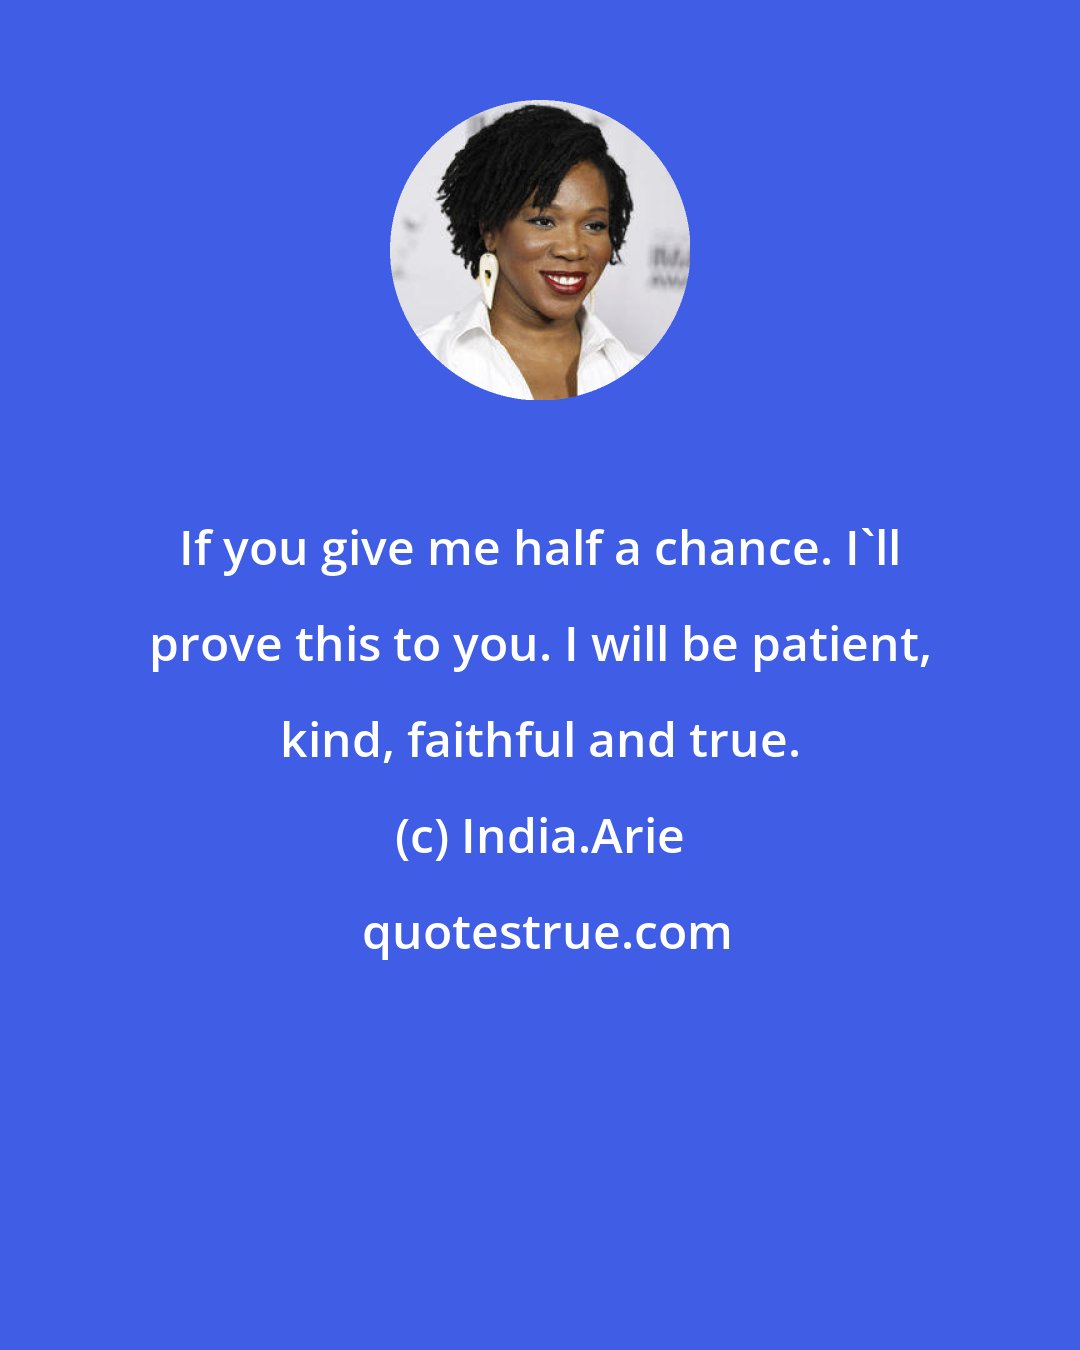 India.Arie: If you give me half a chance. I'll prove this to you. I will be patient, kind, faithful and true.